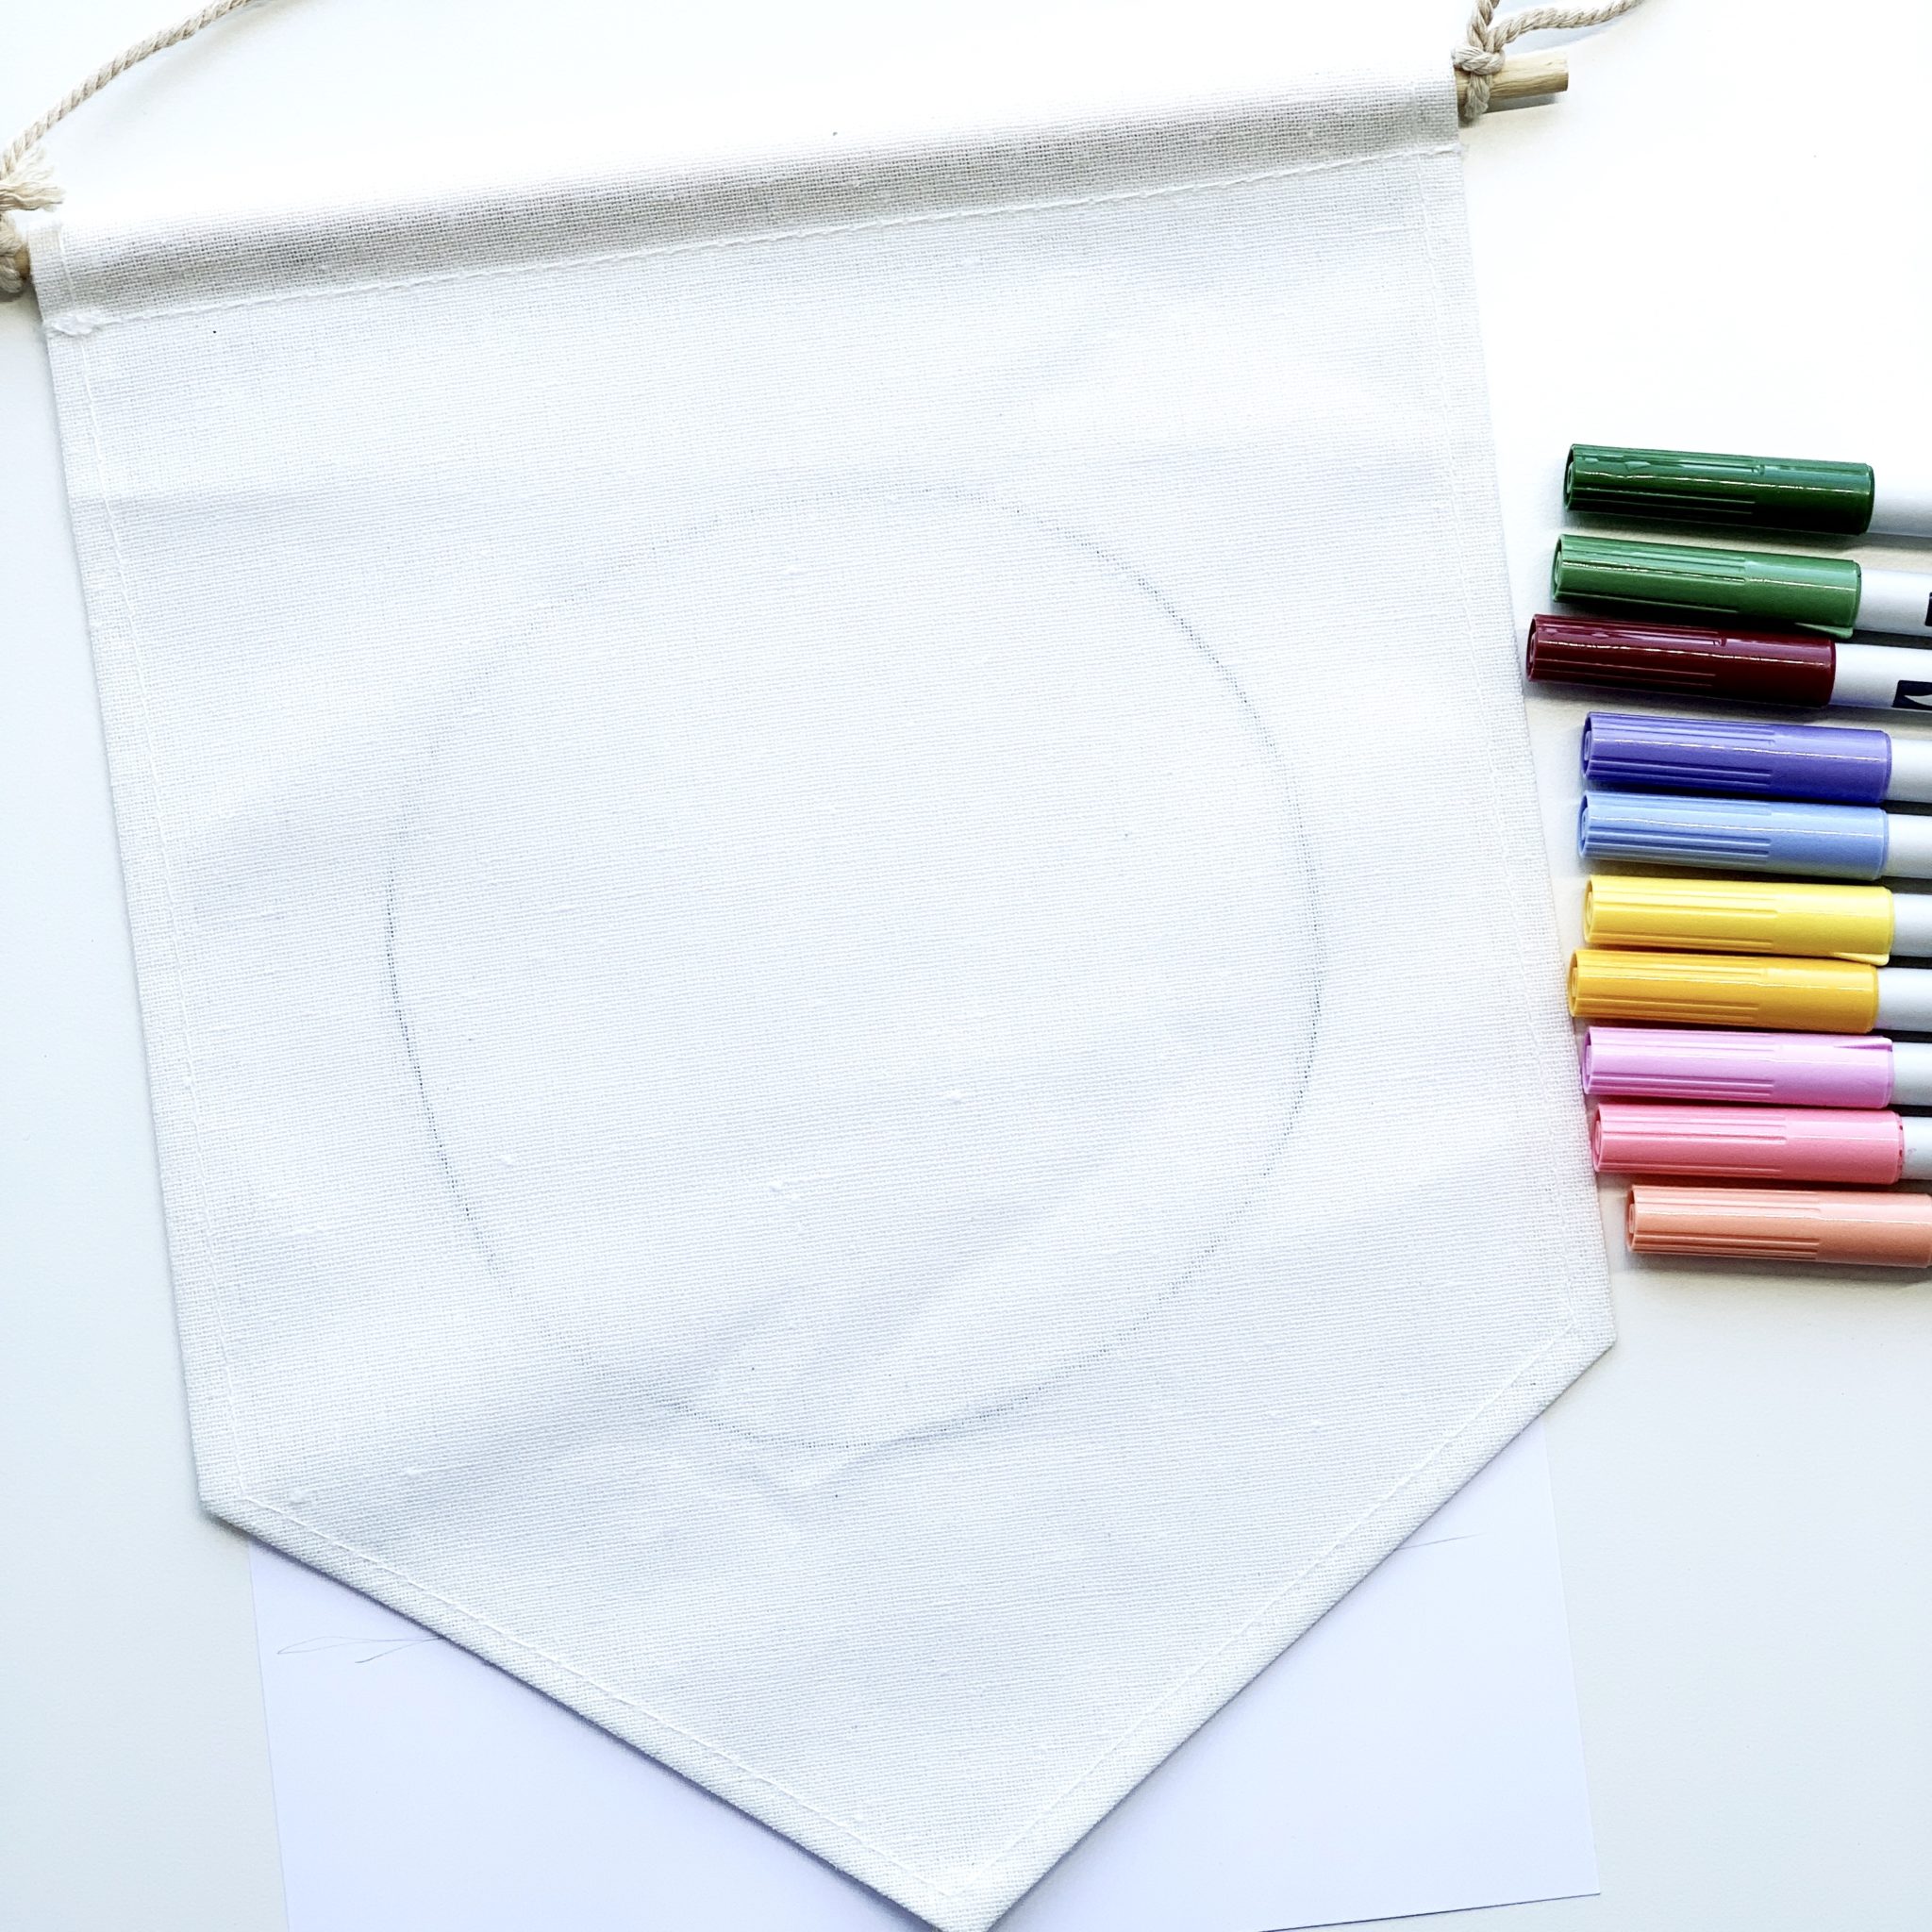 Decorate a Fabric Banner with ABT PRO Markers  - Adrienne Castleton